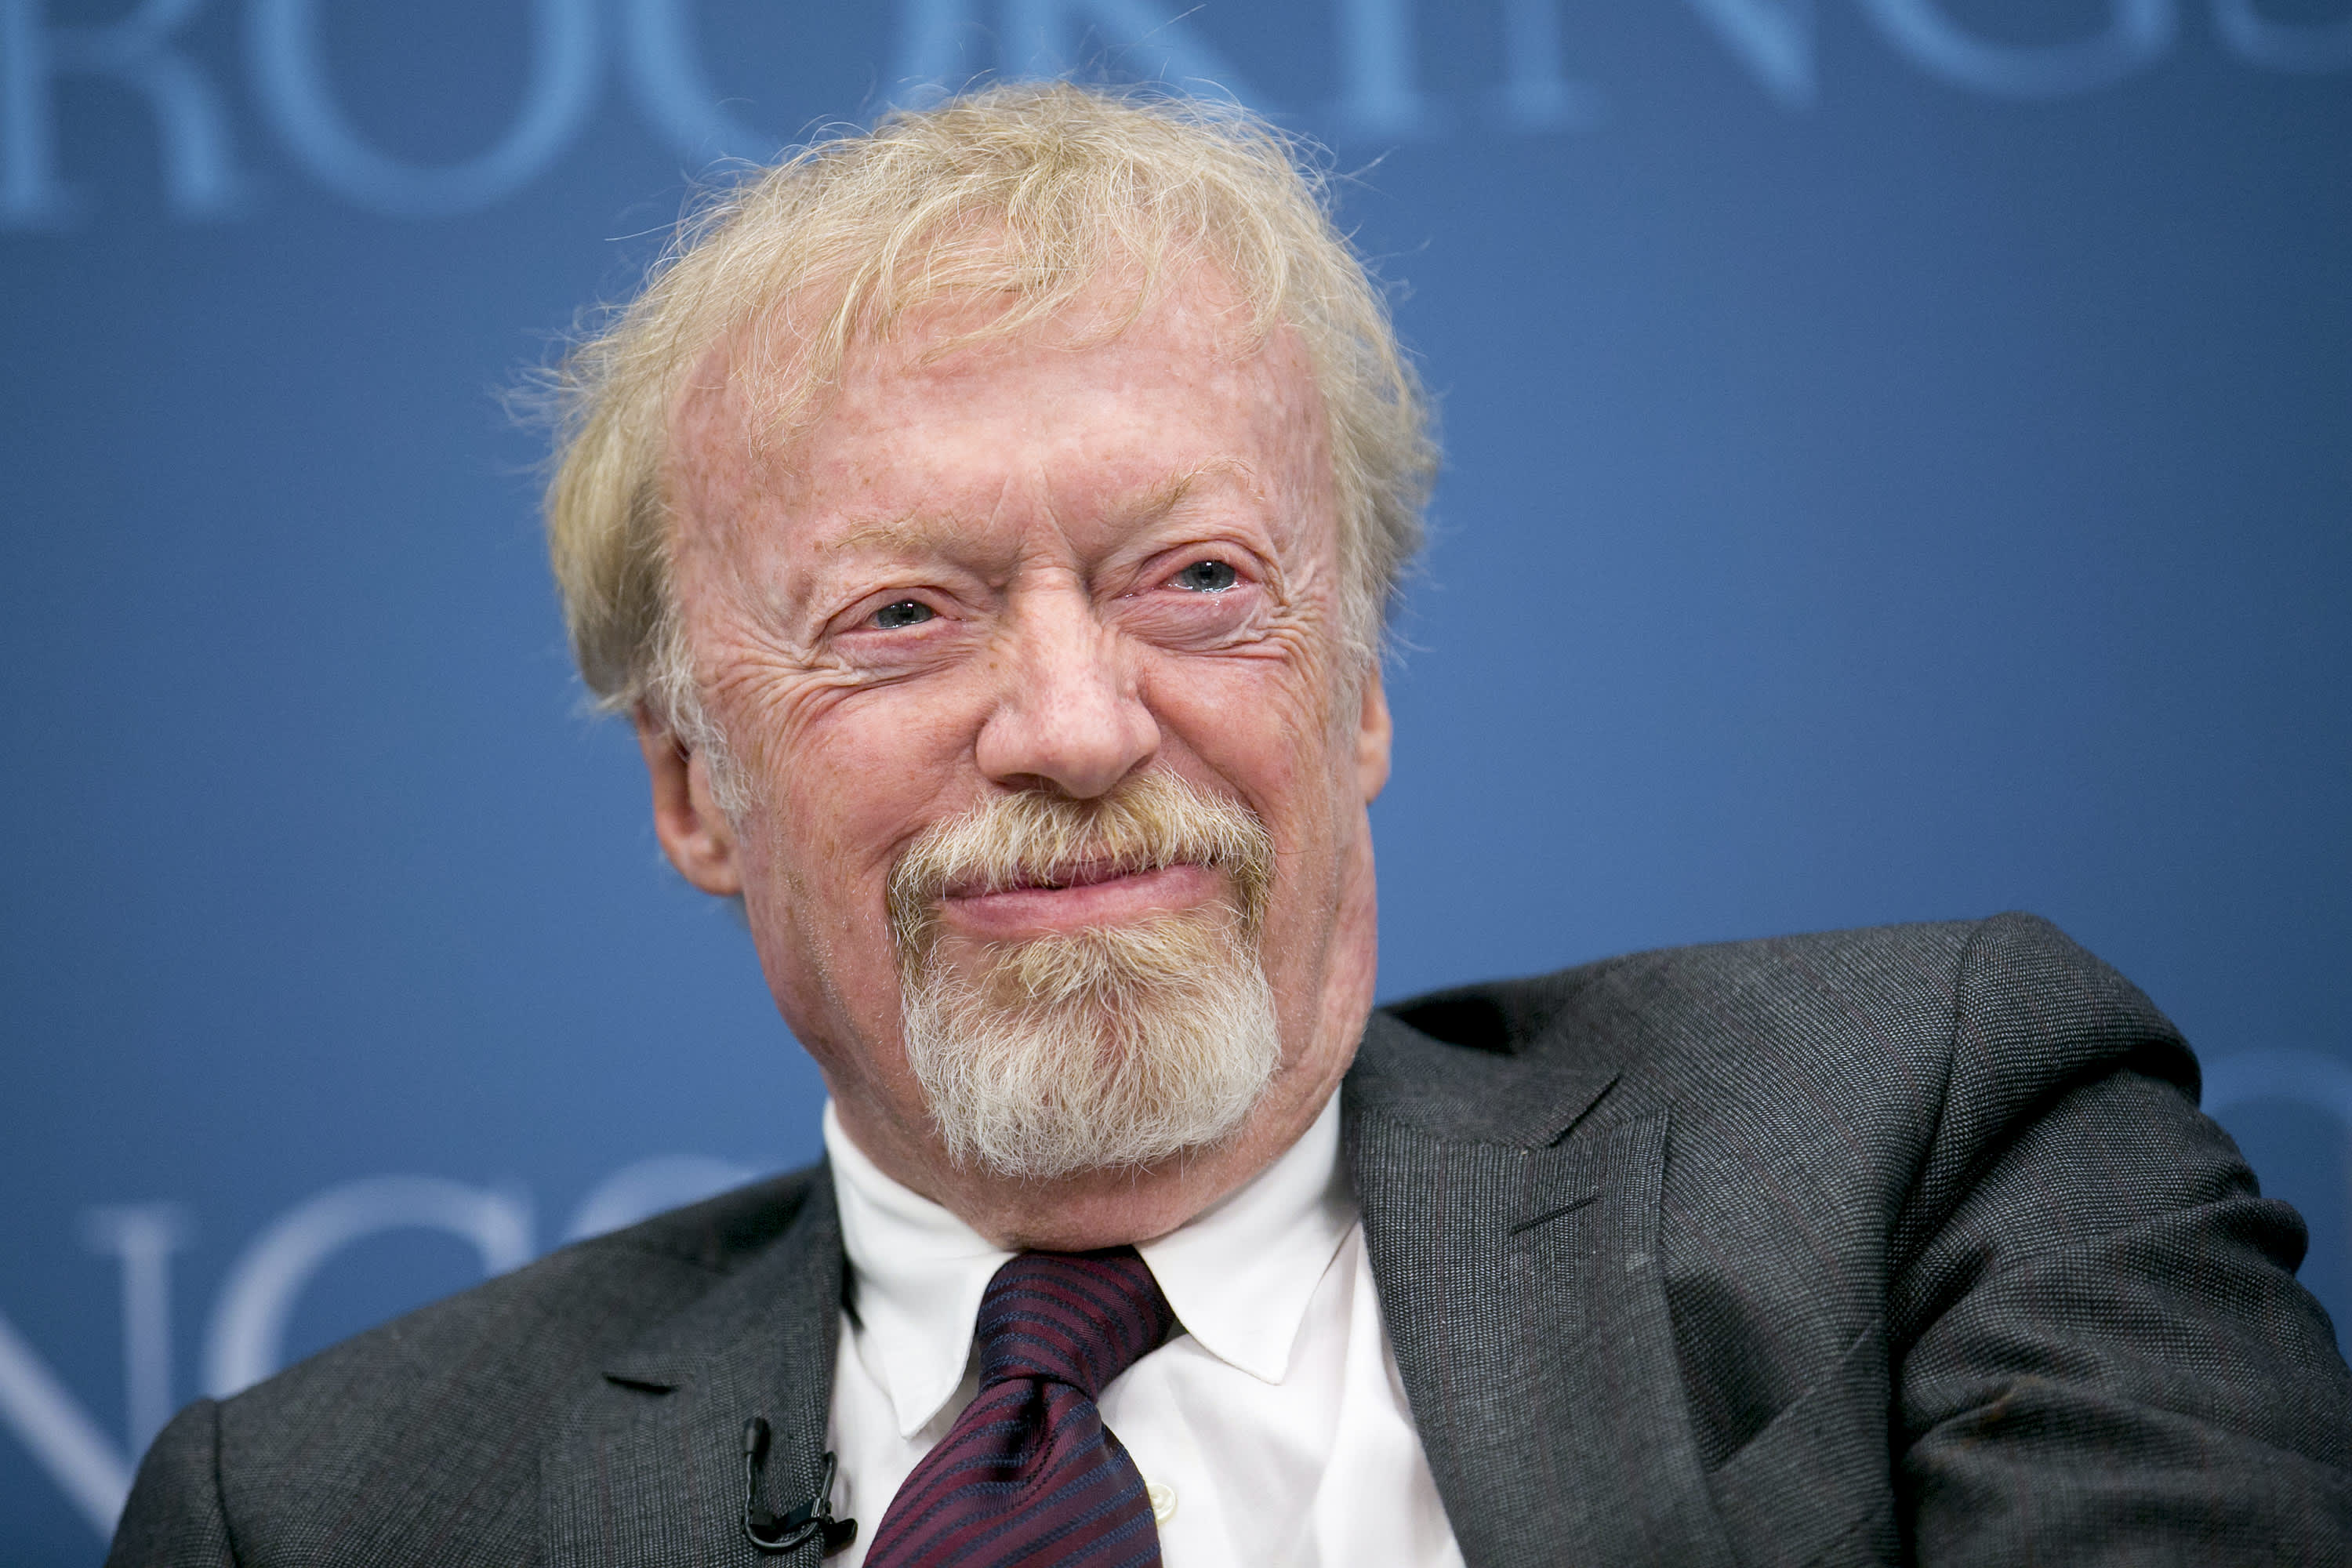 Nike co-founder Phil Knight was told he 